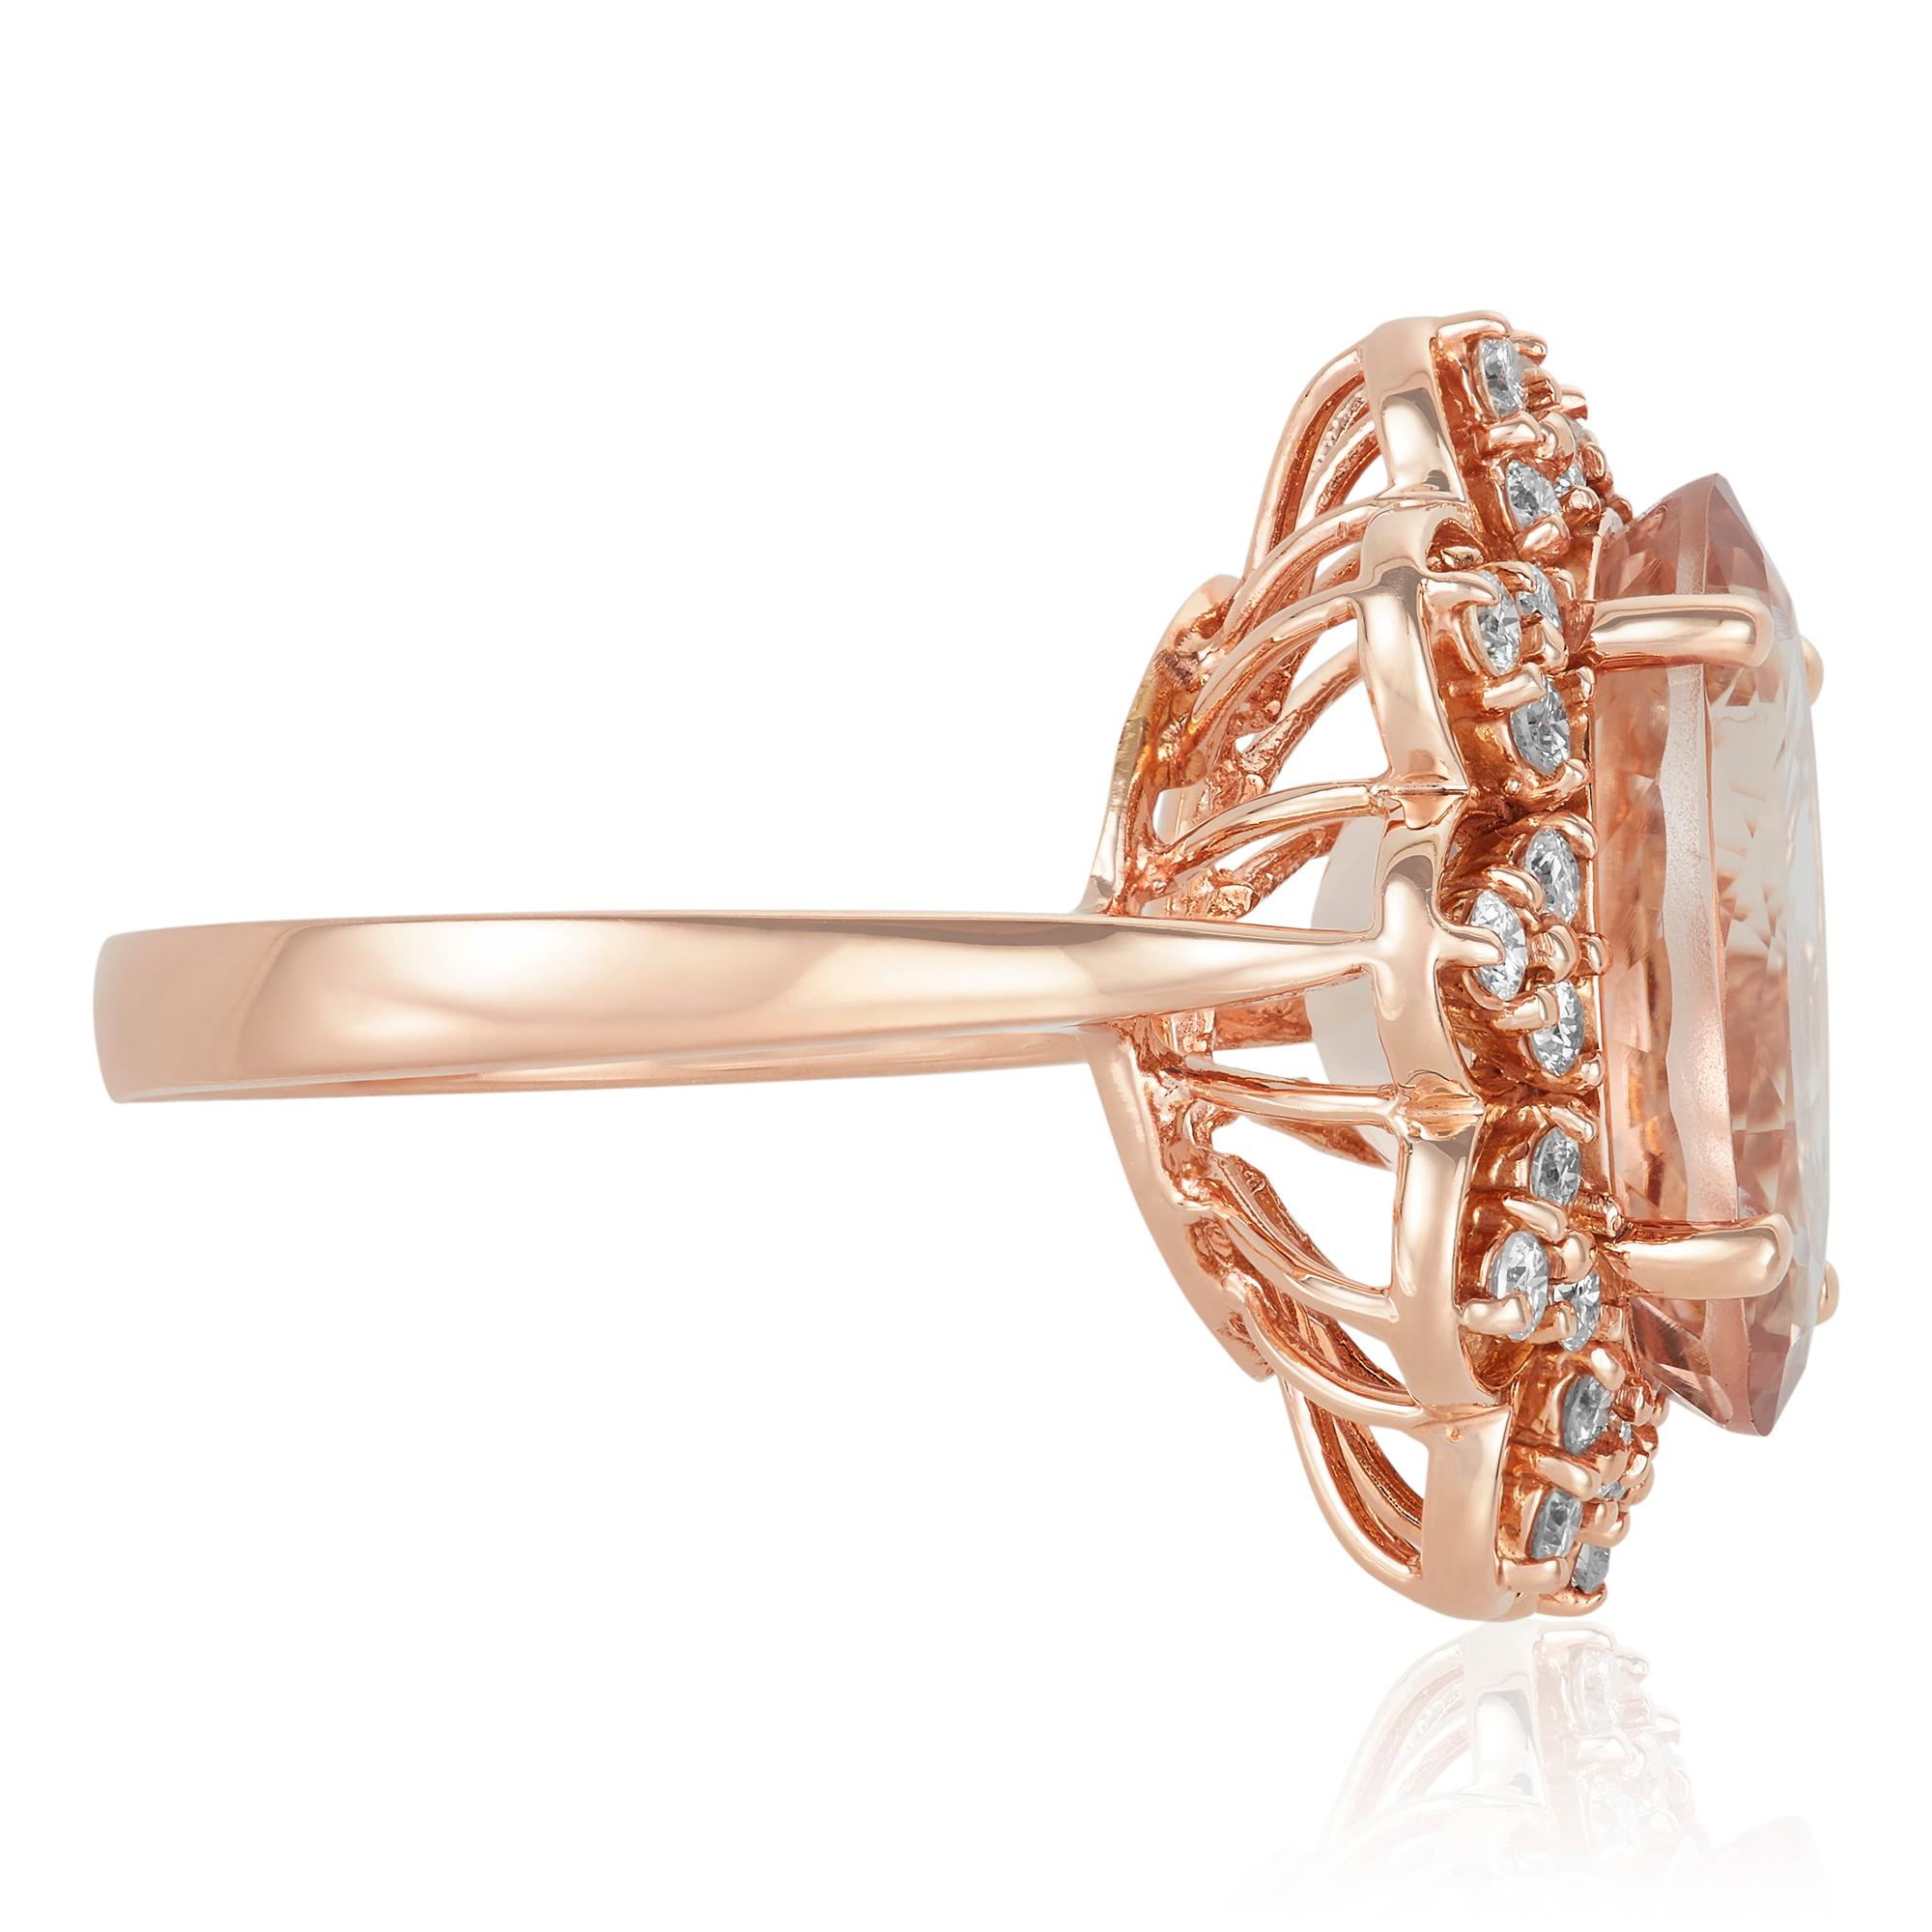 Metal: 14K Rose Gold
Center Stone: 1 Oval Shaped Pink Morganite at 8.55 ct- Measuirng 16 x 12 mm
Diamond Details: 30 Brilliant Round White Diamonds at 0.65 Carats- Clarity: VS-SI / Color H-I
Ring size: Customizable

Undeniably rare, colorfully